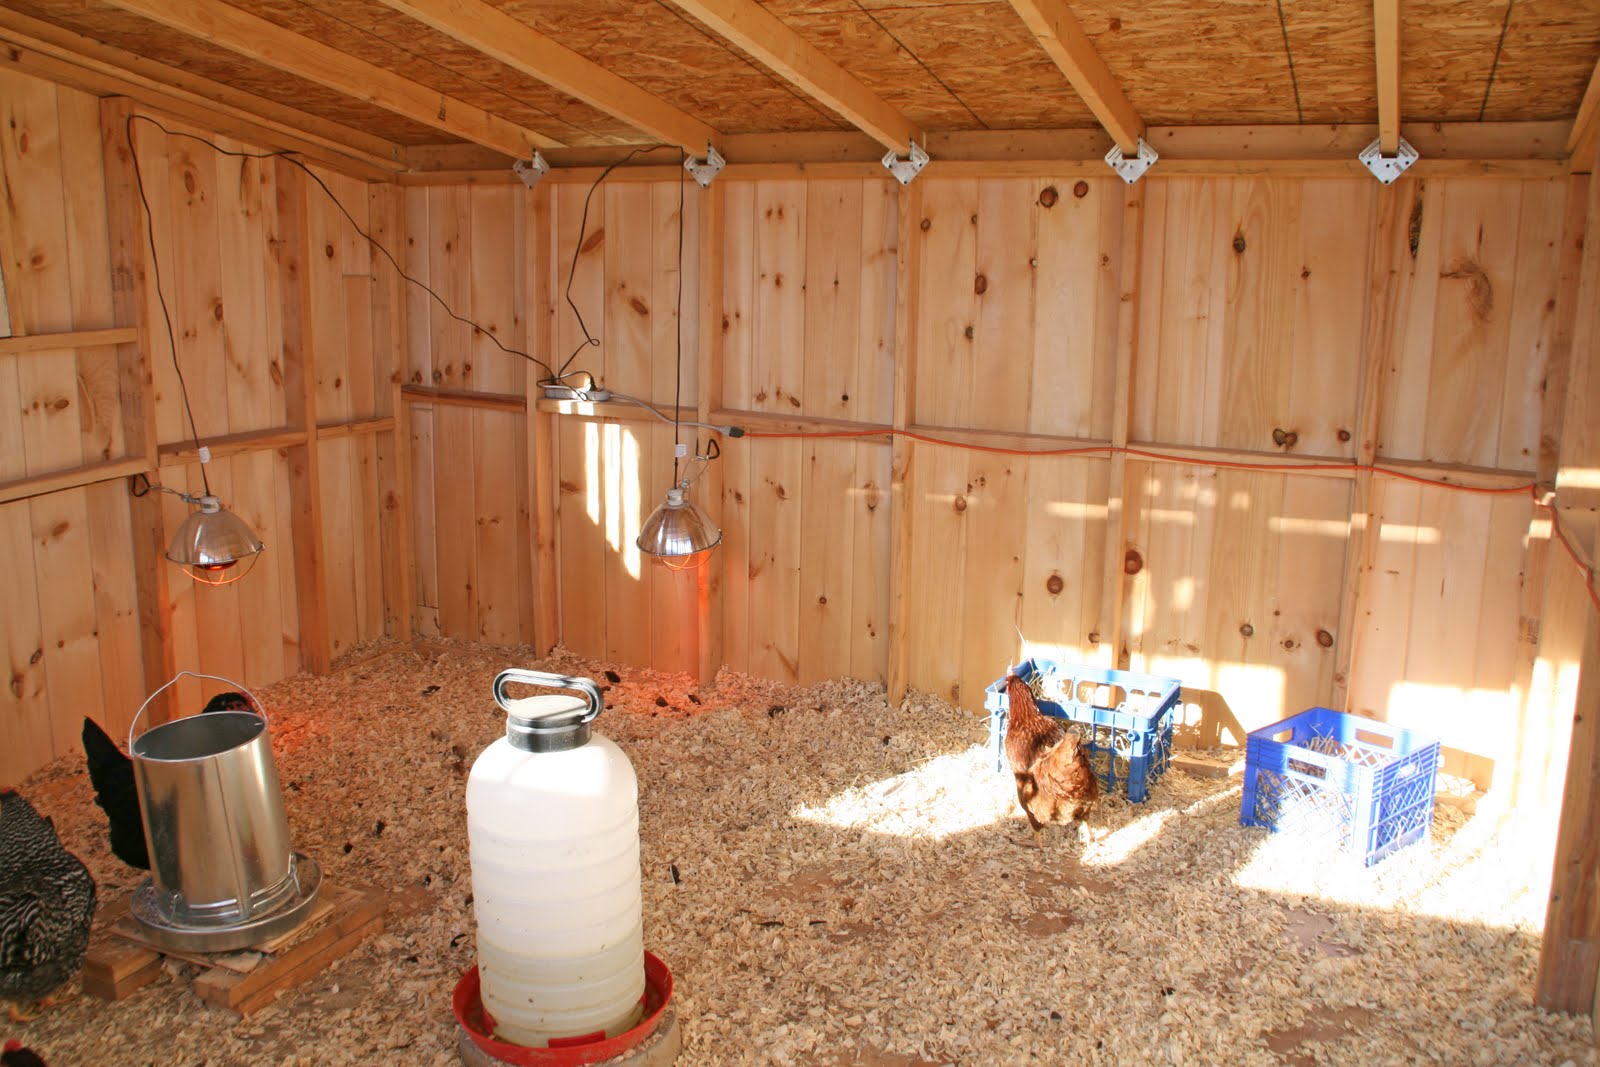 Get poultry sheds for lease